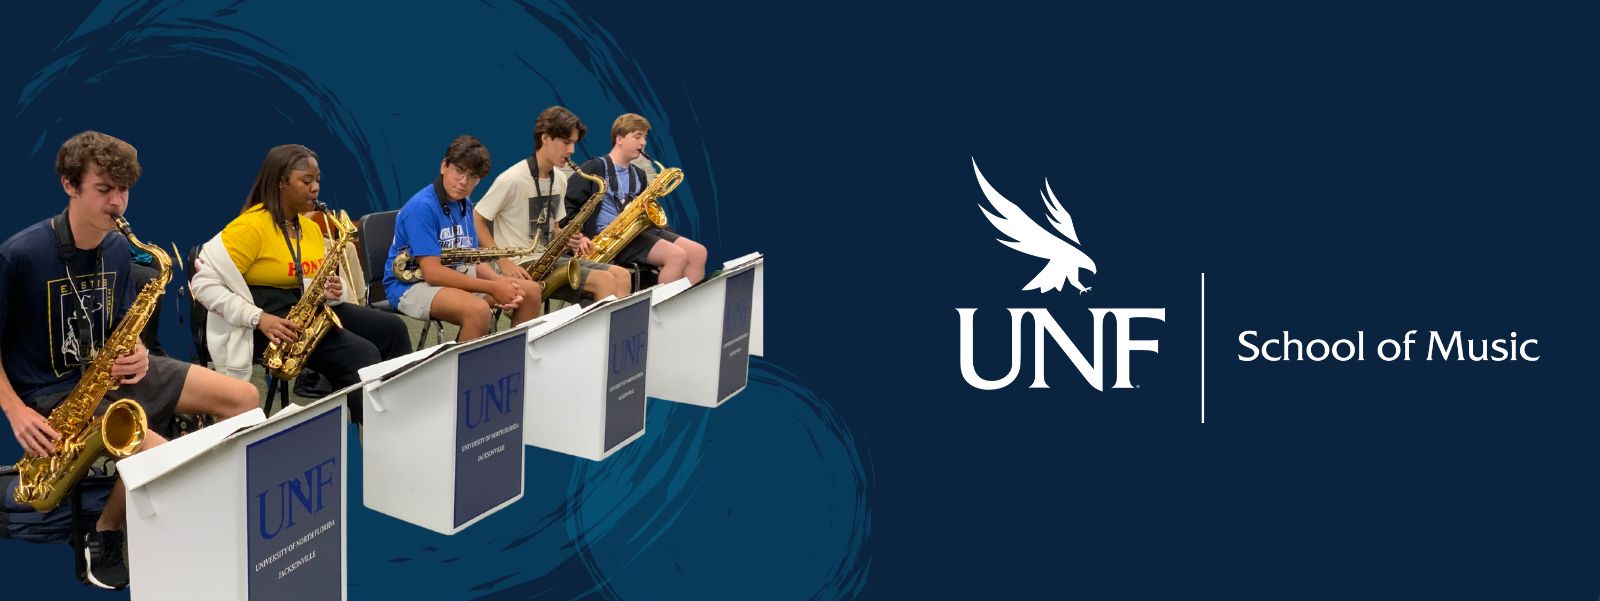 Students sitting down and playing saxophone.